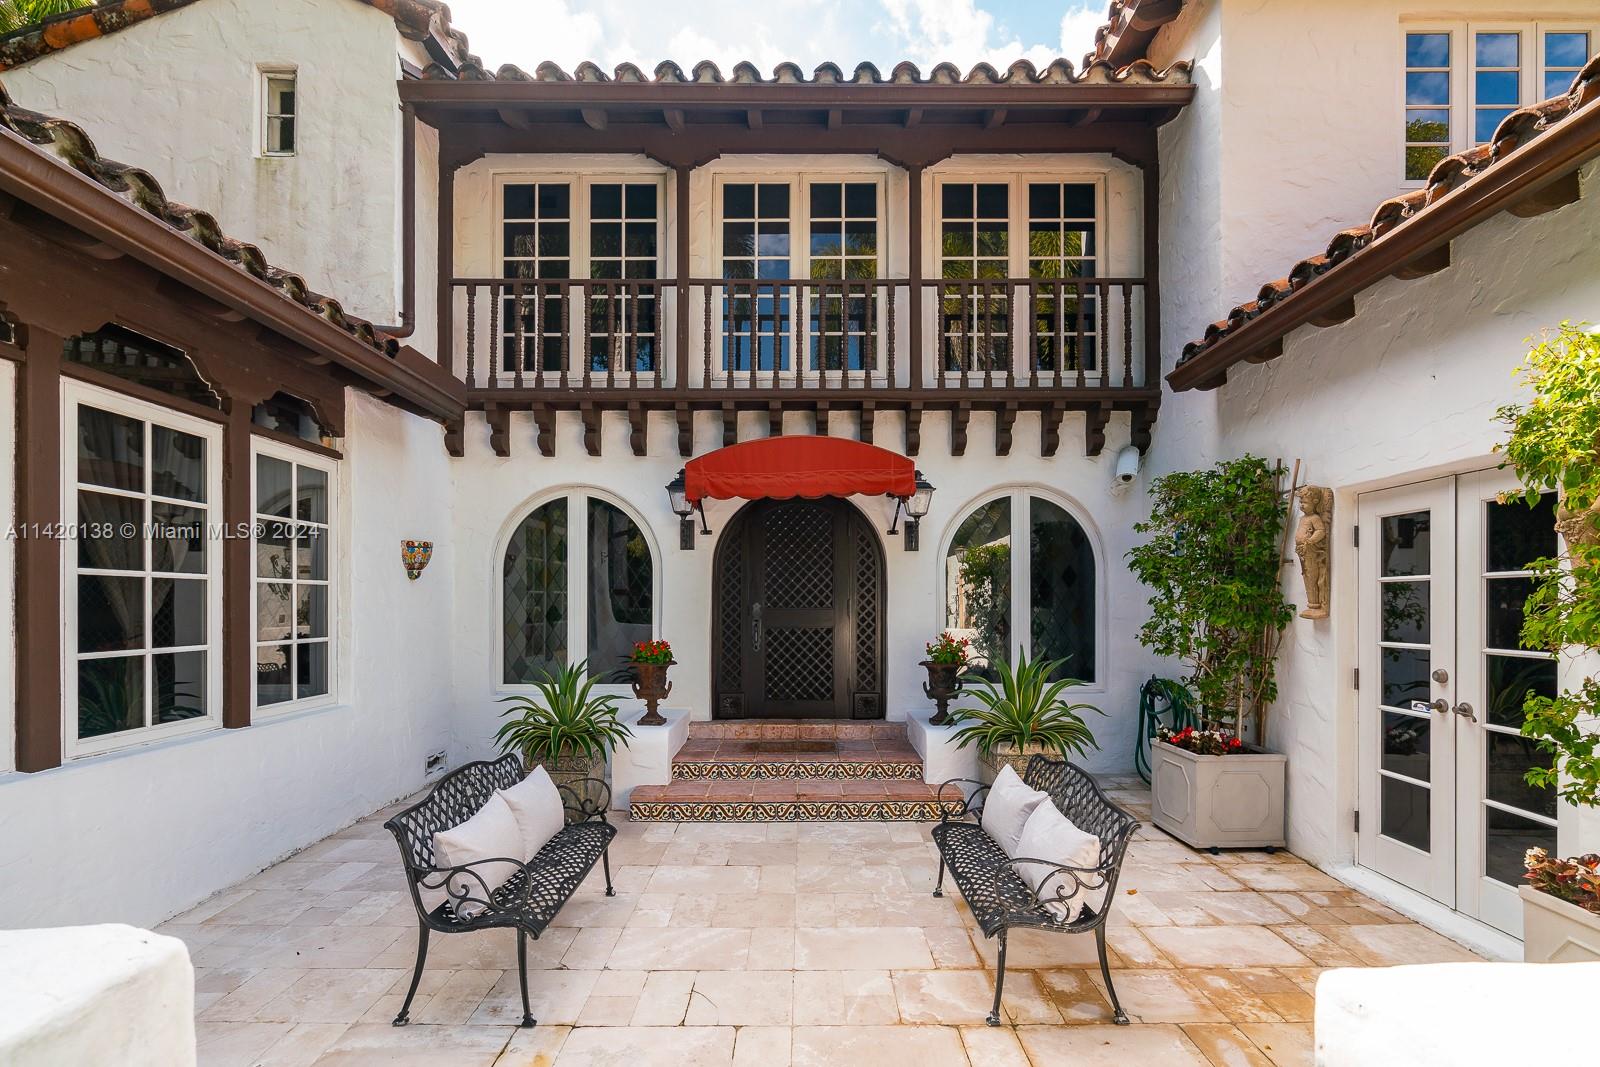 Beautifully restored, historically designated 1920's Old Spanish style villa with 6397 actual square feet (5044 living area) on a 15,750 sq ft lot steps from the Biltmore Hotel & Golf Course, Salvadore Park and the Venetian Pool. Classical architecture with loggia, Palladian window frames, high timber-beamed ceilings & sun-dappled courtyards. There are 6 bedrooms and 6.5 bathrooms. The primary bedroom suite & 3 other bedrooms are upstairs.  Guest bedroom and a maid's bedroom on the 1st floor. Summer kitchen, large library & office by the heated pool. The home is walled and gated and within walking distance to many Coral Gables landmark destinations and to Downtown Coral Gables. 2-car garage, impact doors & windows. Also available for annual lease at $35,000 a month or $45,000 furnished